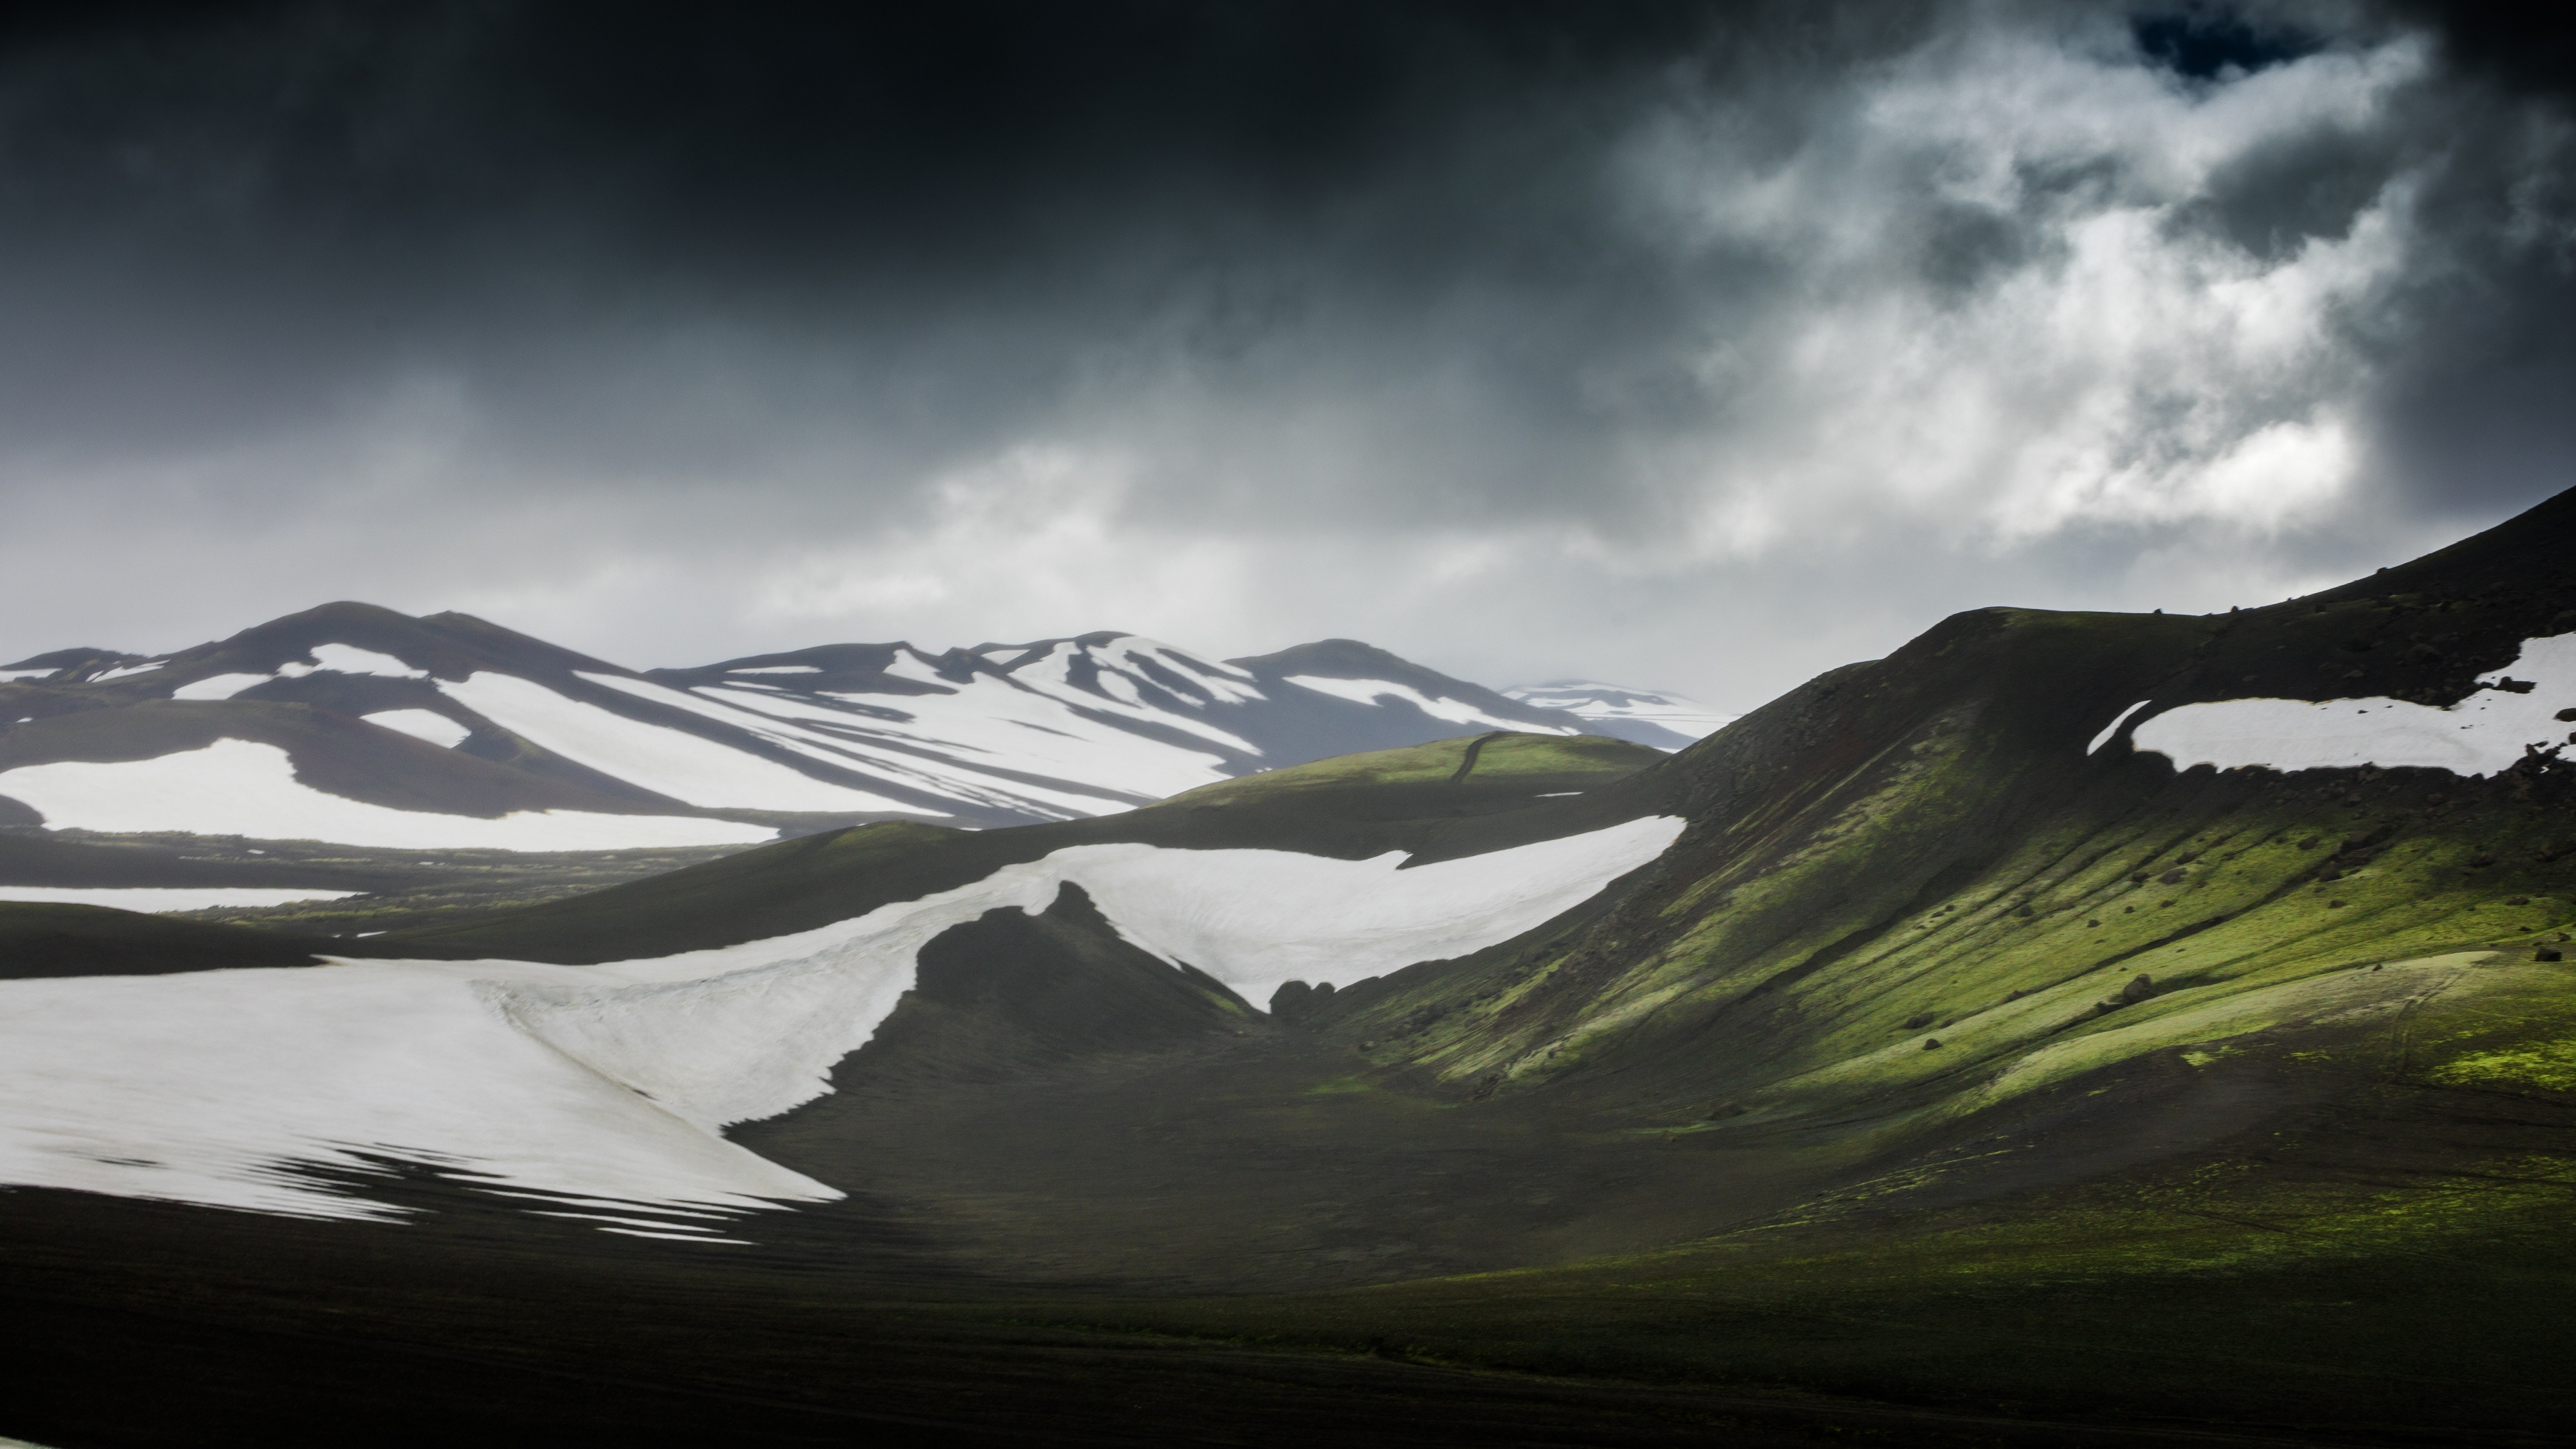 Download Landscape and mountains, cloudy day, Iceland wallpaper, 3840x 4K UHD 16: Widescreen